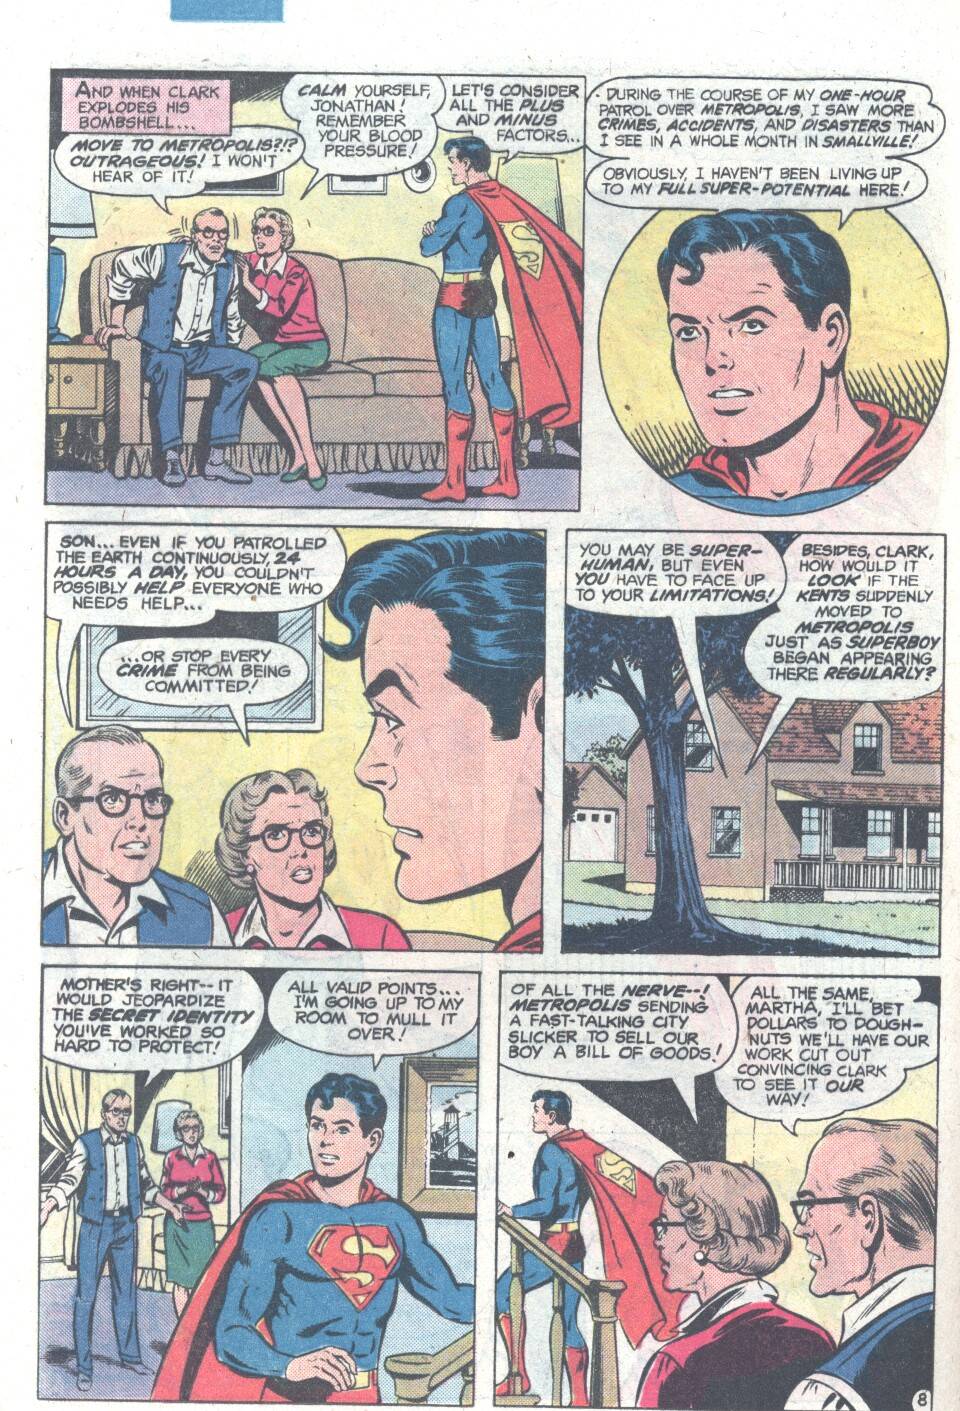 The New Adventures of Superboy 6 Page 8